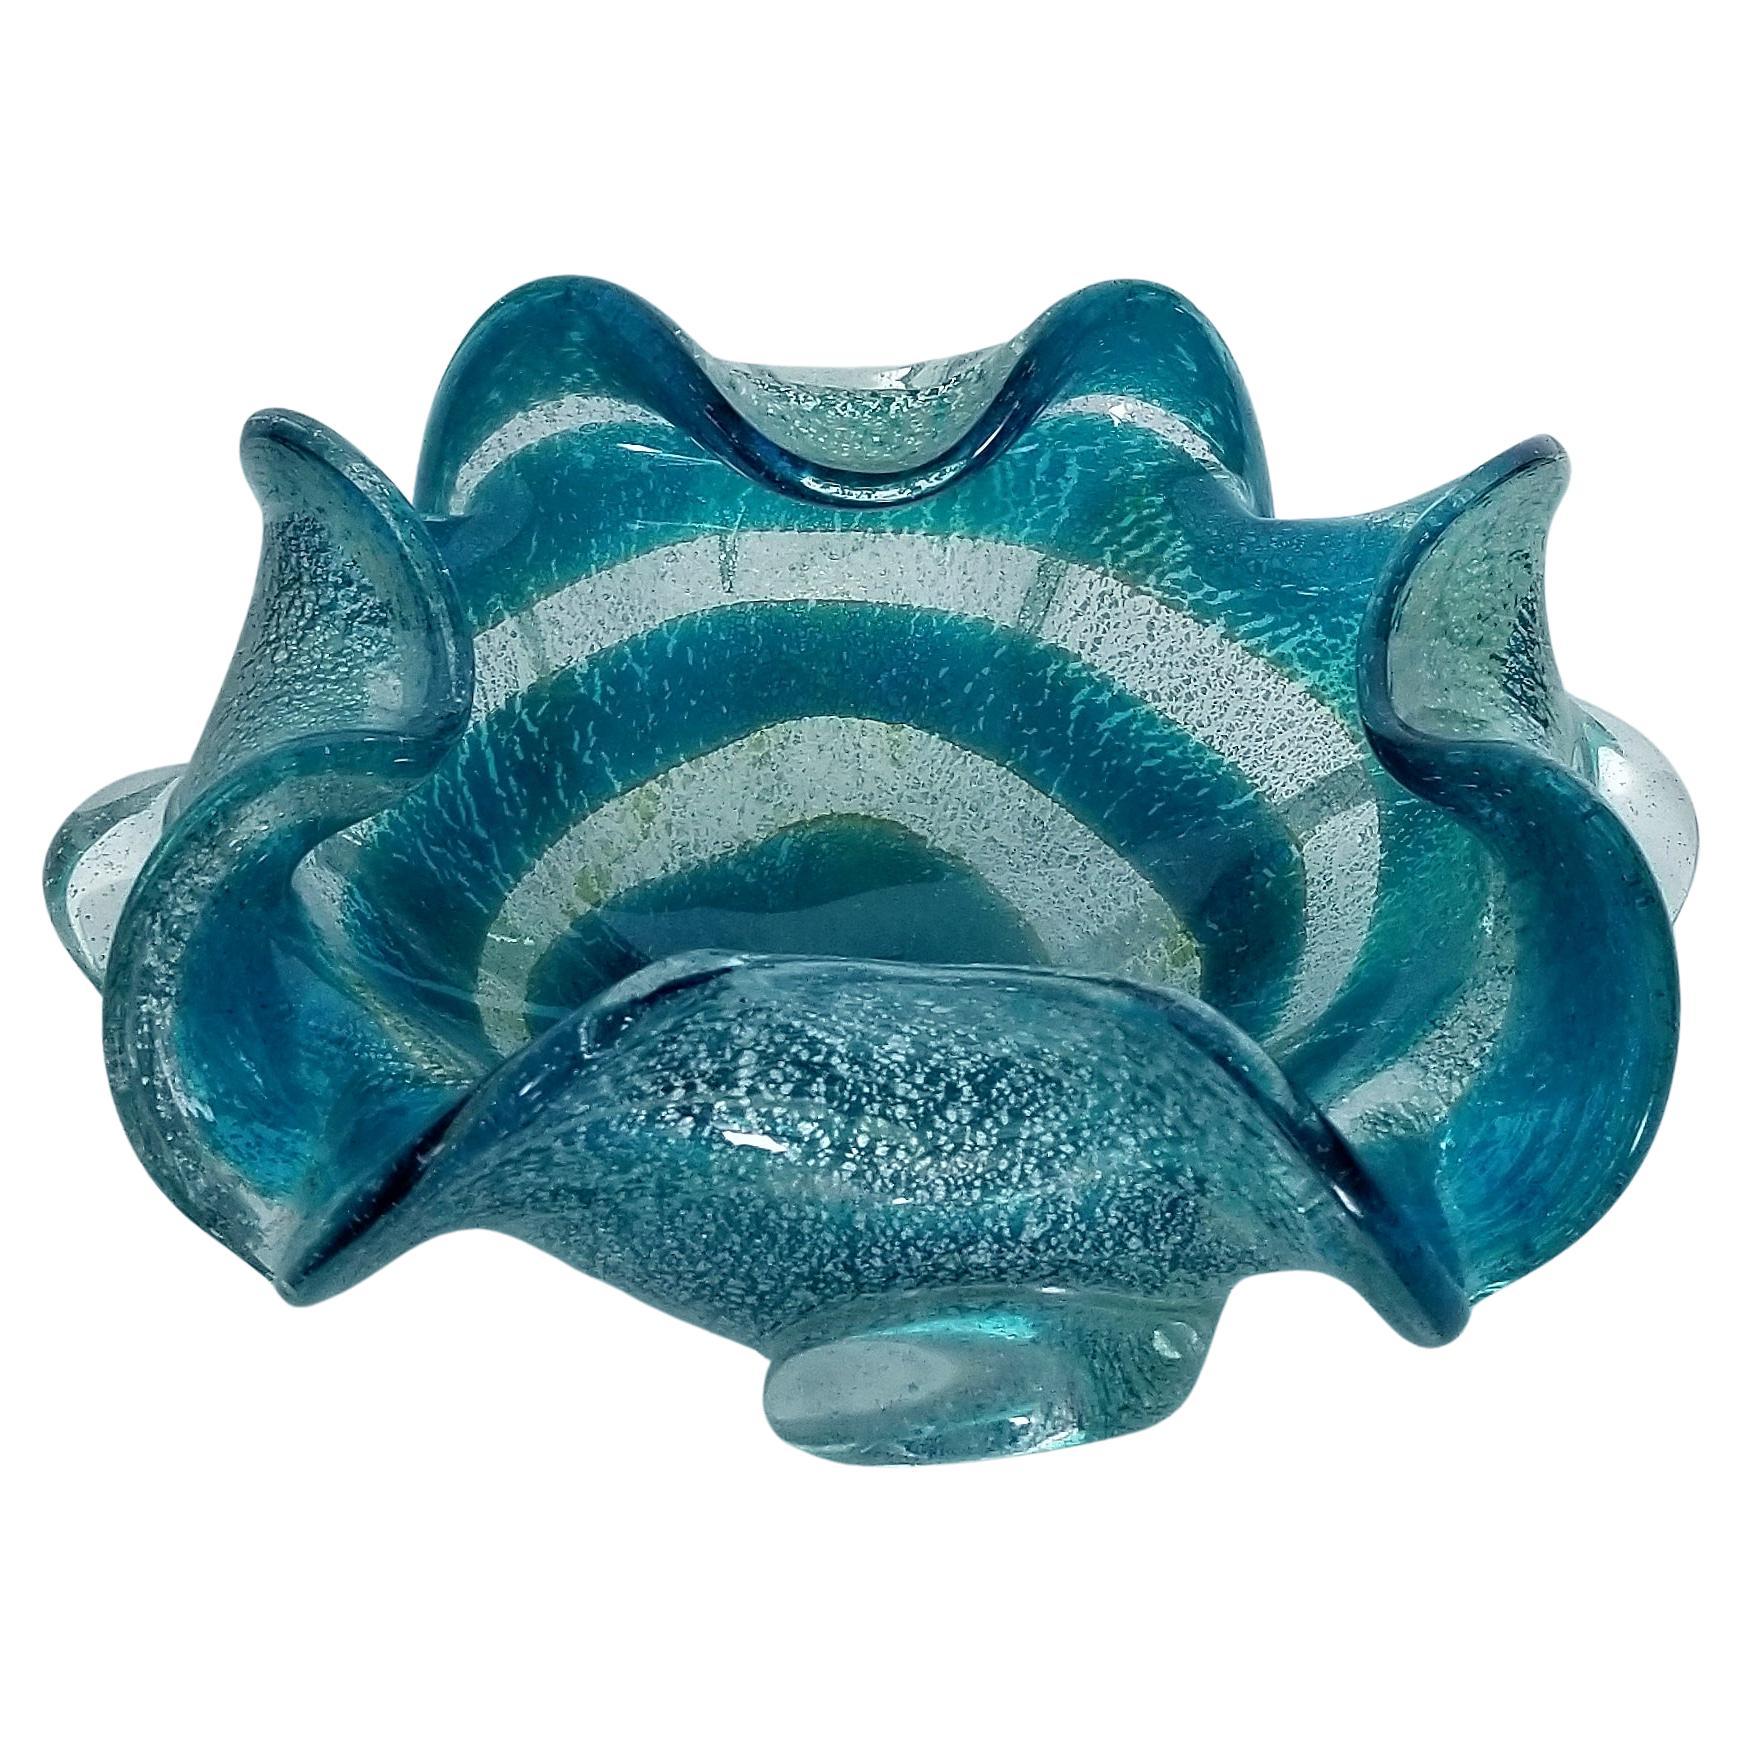 Blue and Silver Murano Glass Ashtray or Catch-all Bowl For Sale 1